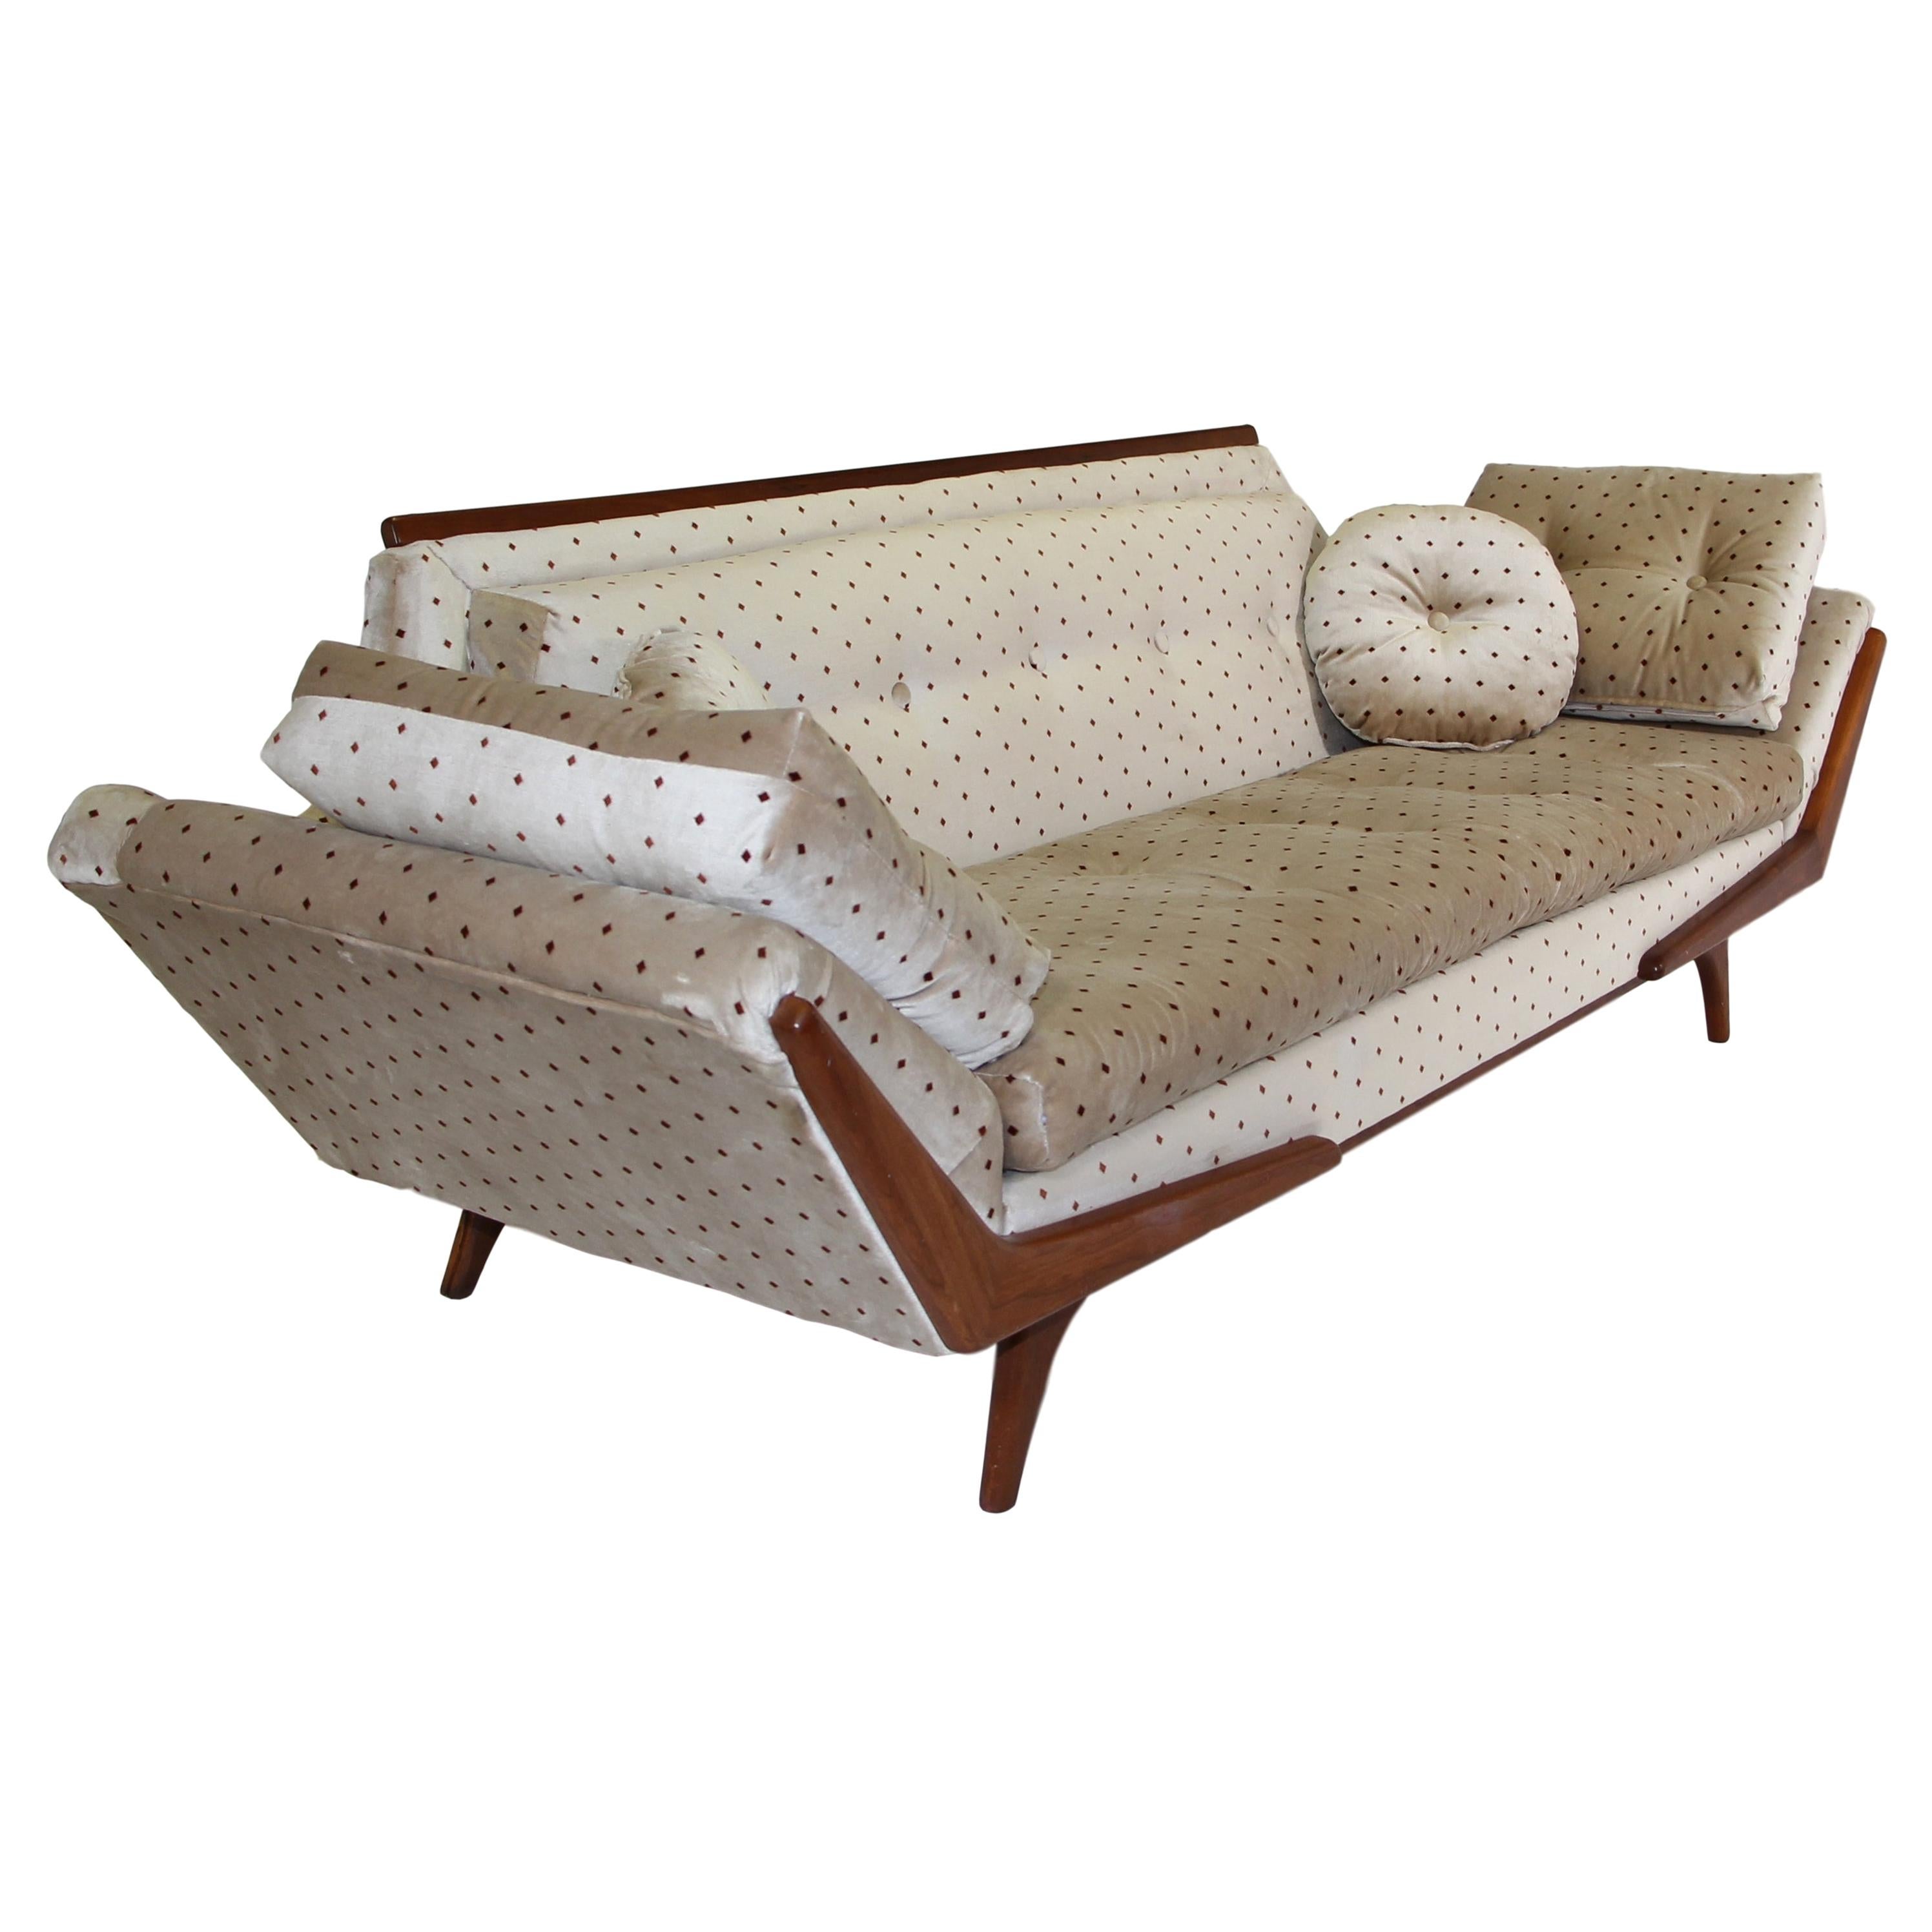 Midcentury Pearsall Style Sofa by Rowe For Sale